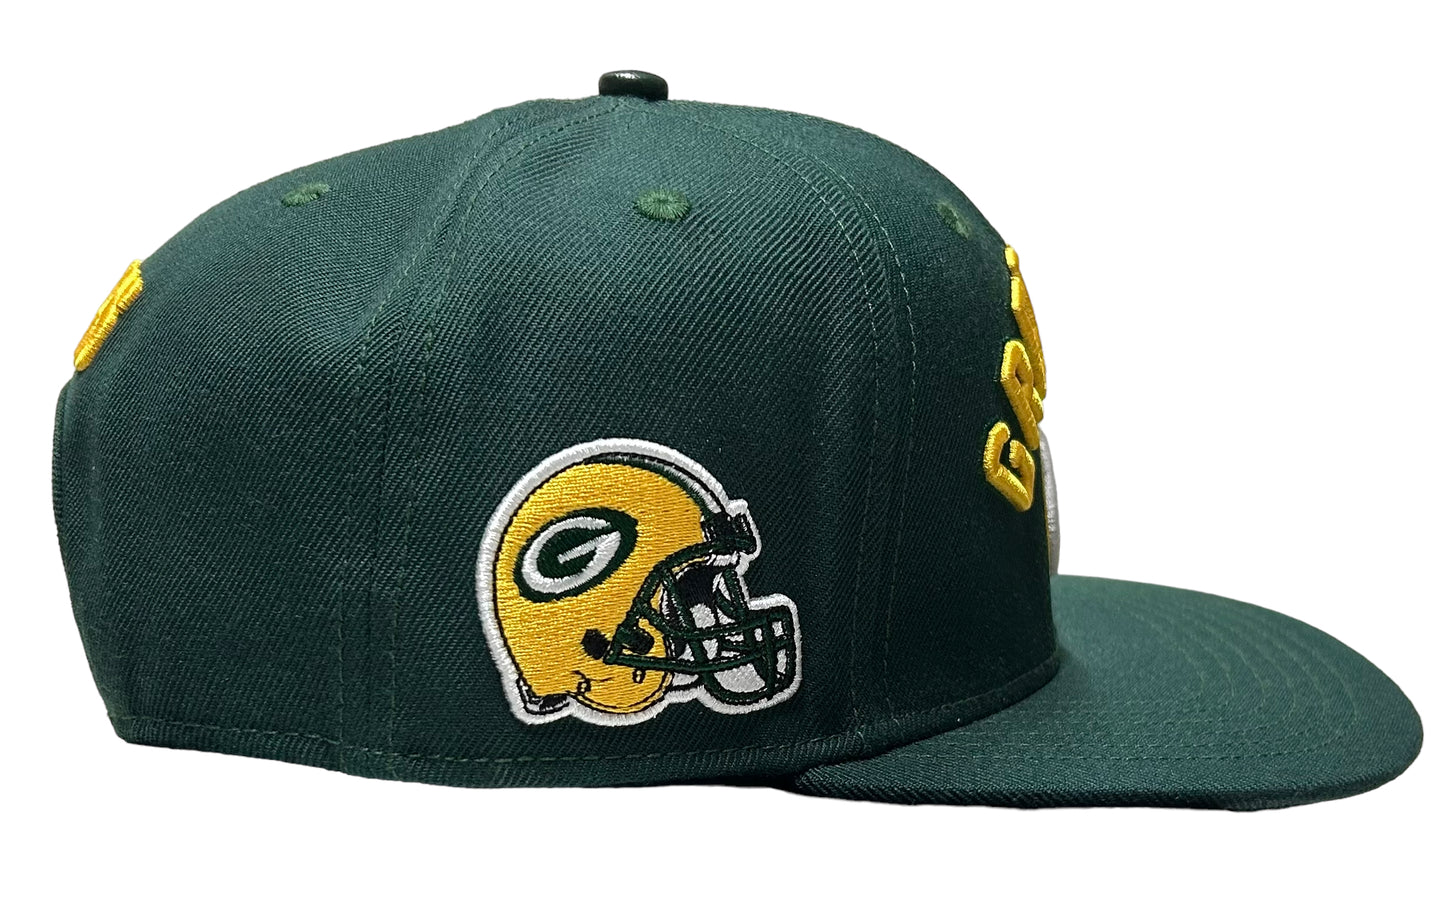 NEW Green Bay Packers PRO STANDARD SnapBack Stacked Logos Helmet Side Patch Hat